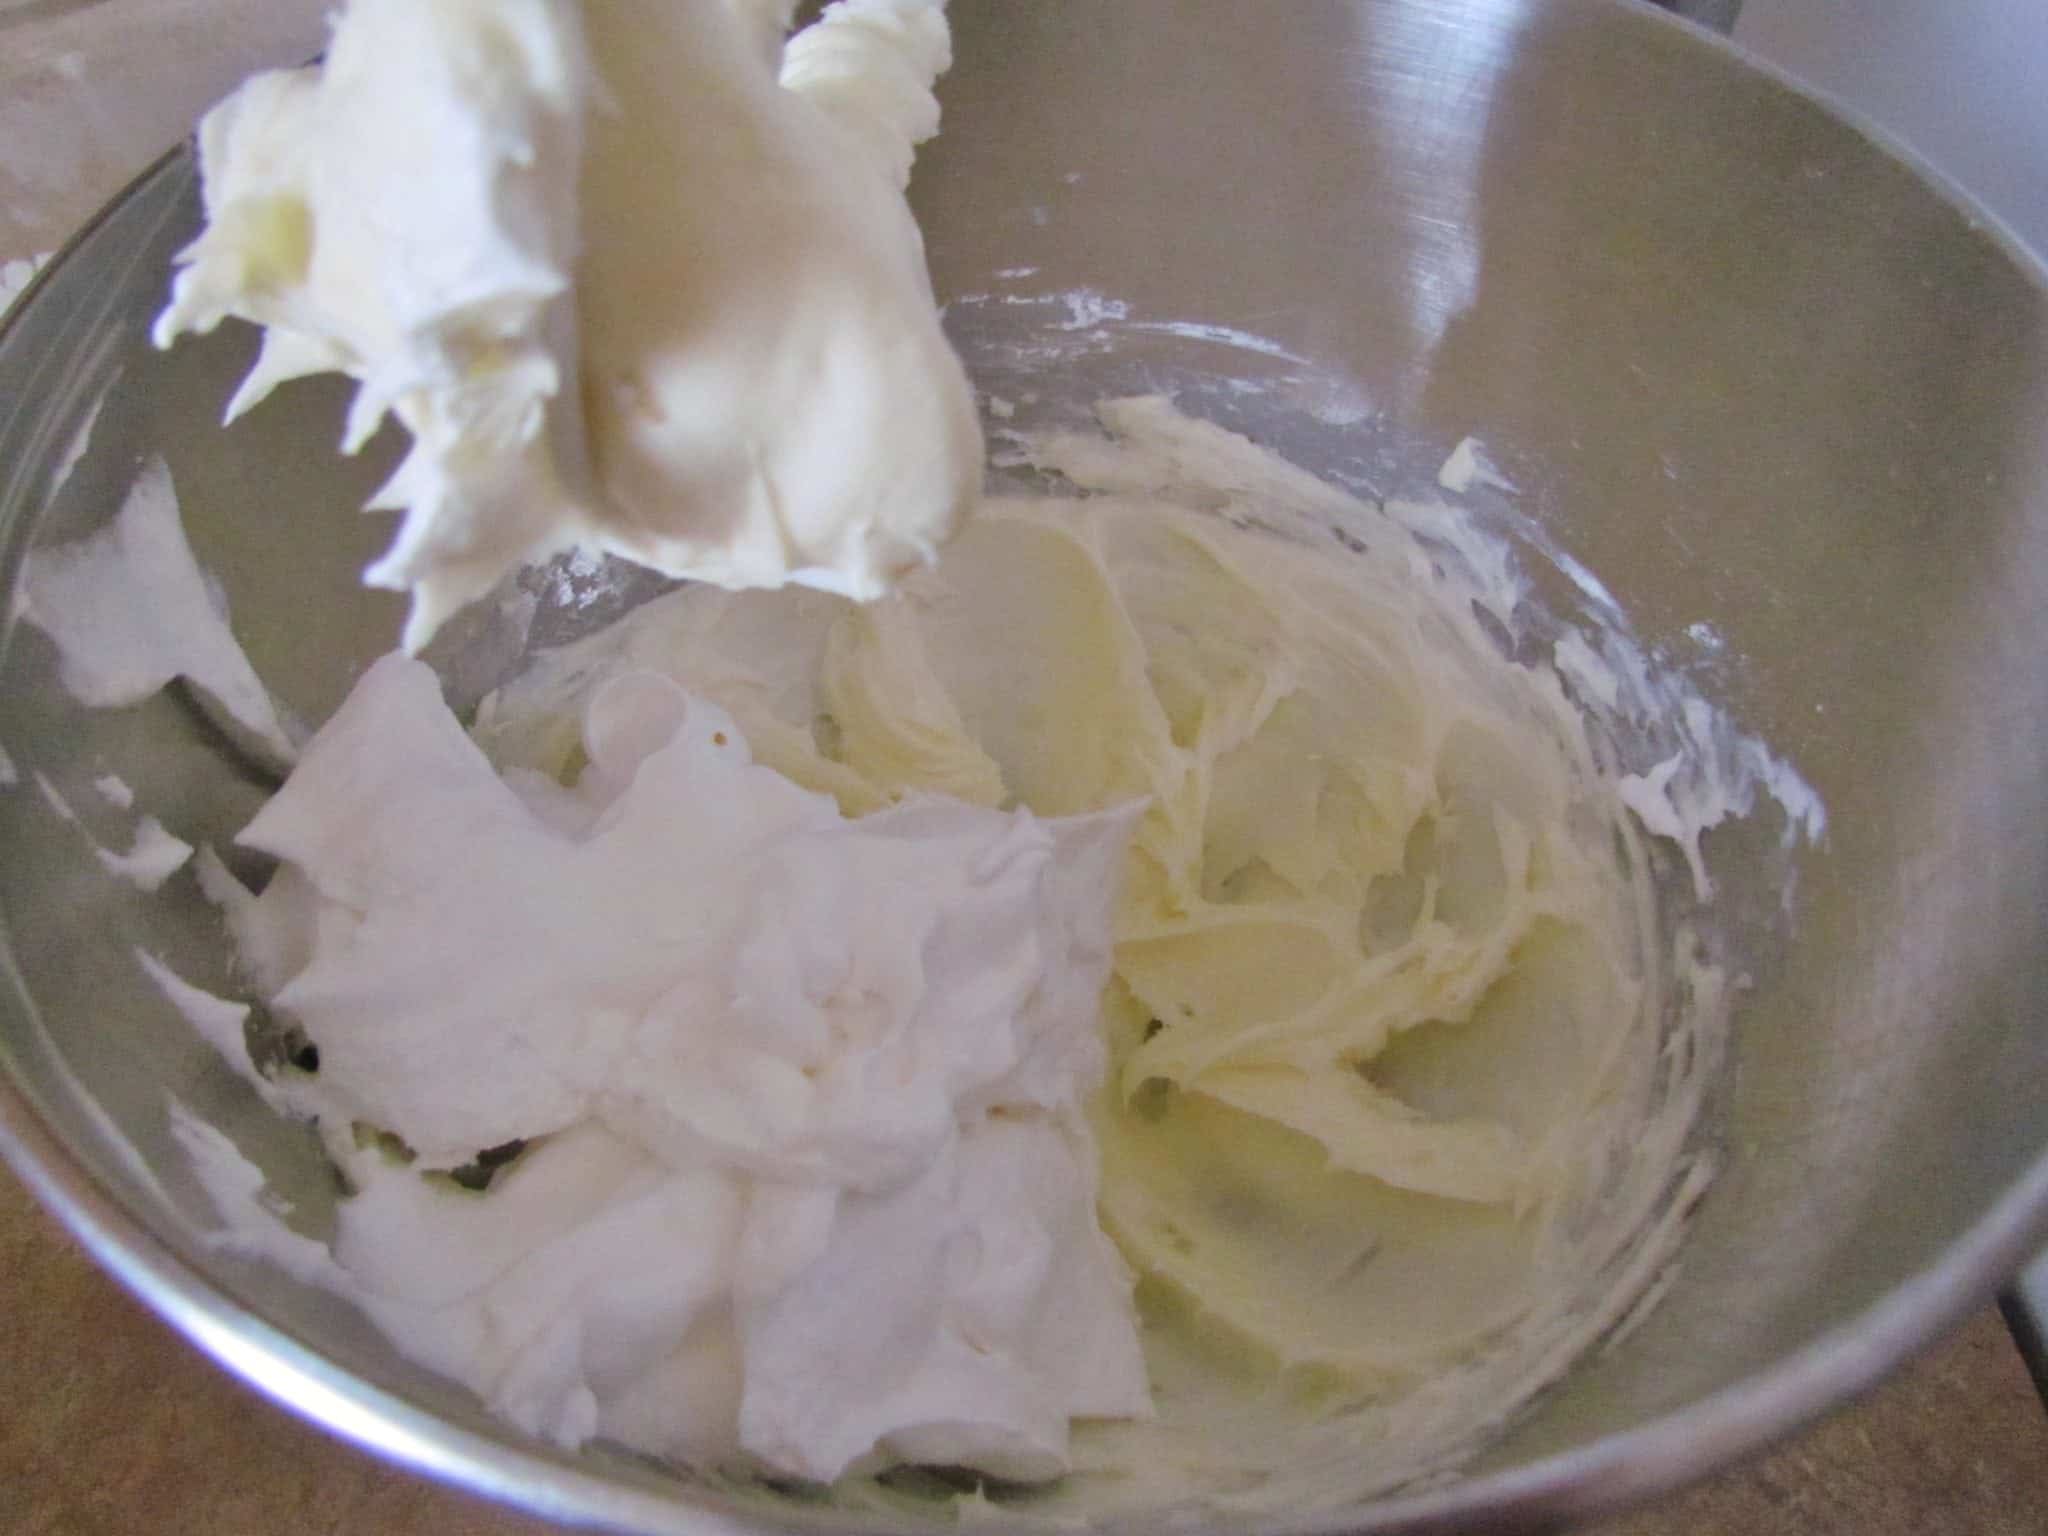 whipped topping mixed together with cream cheese and powdered sugar.